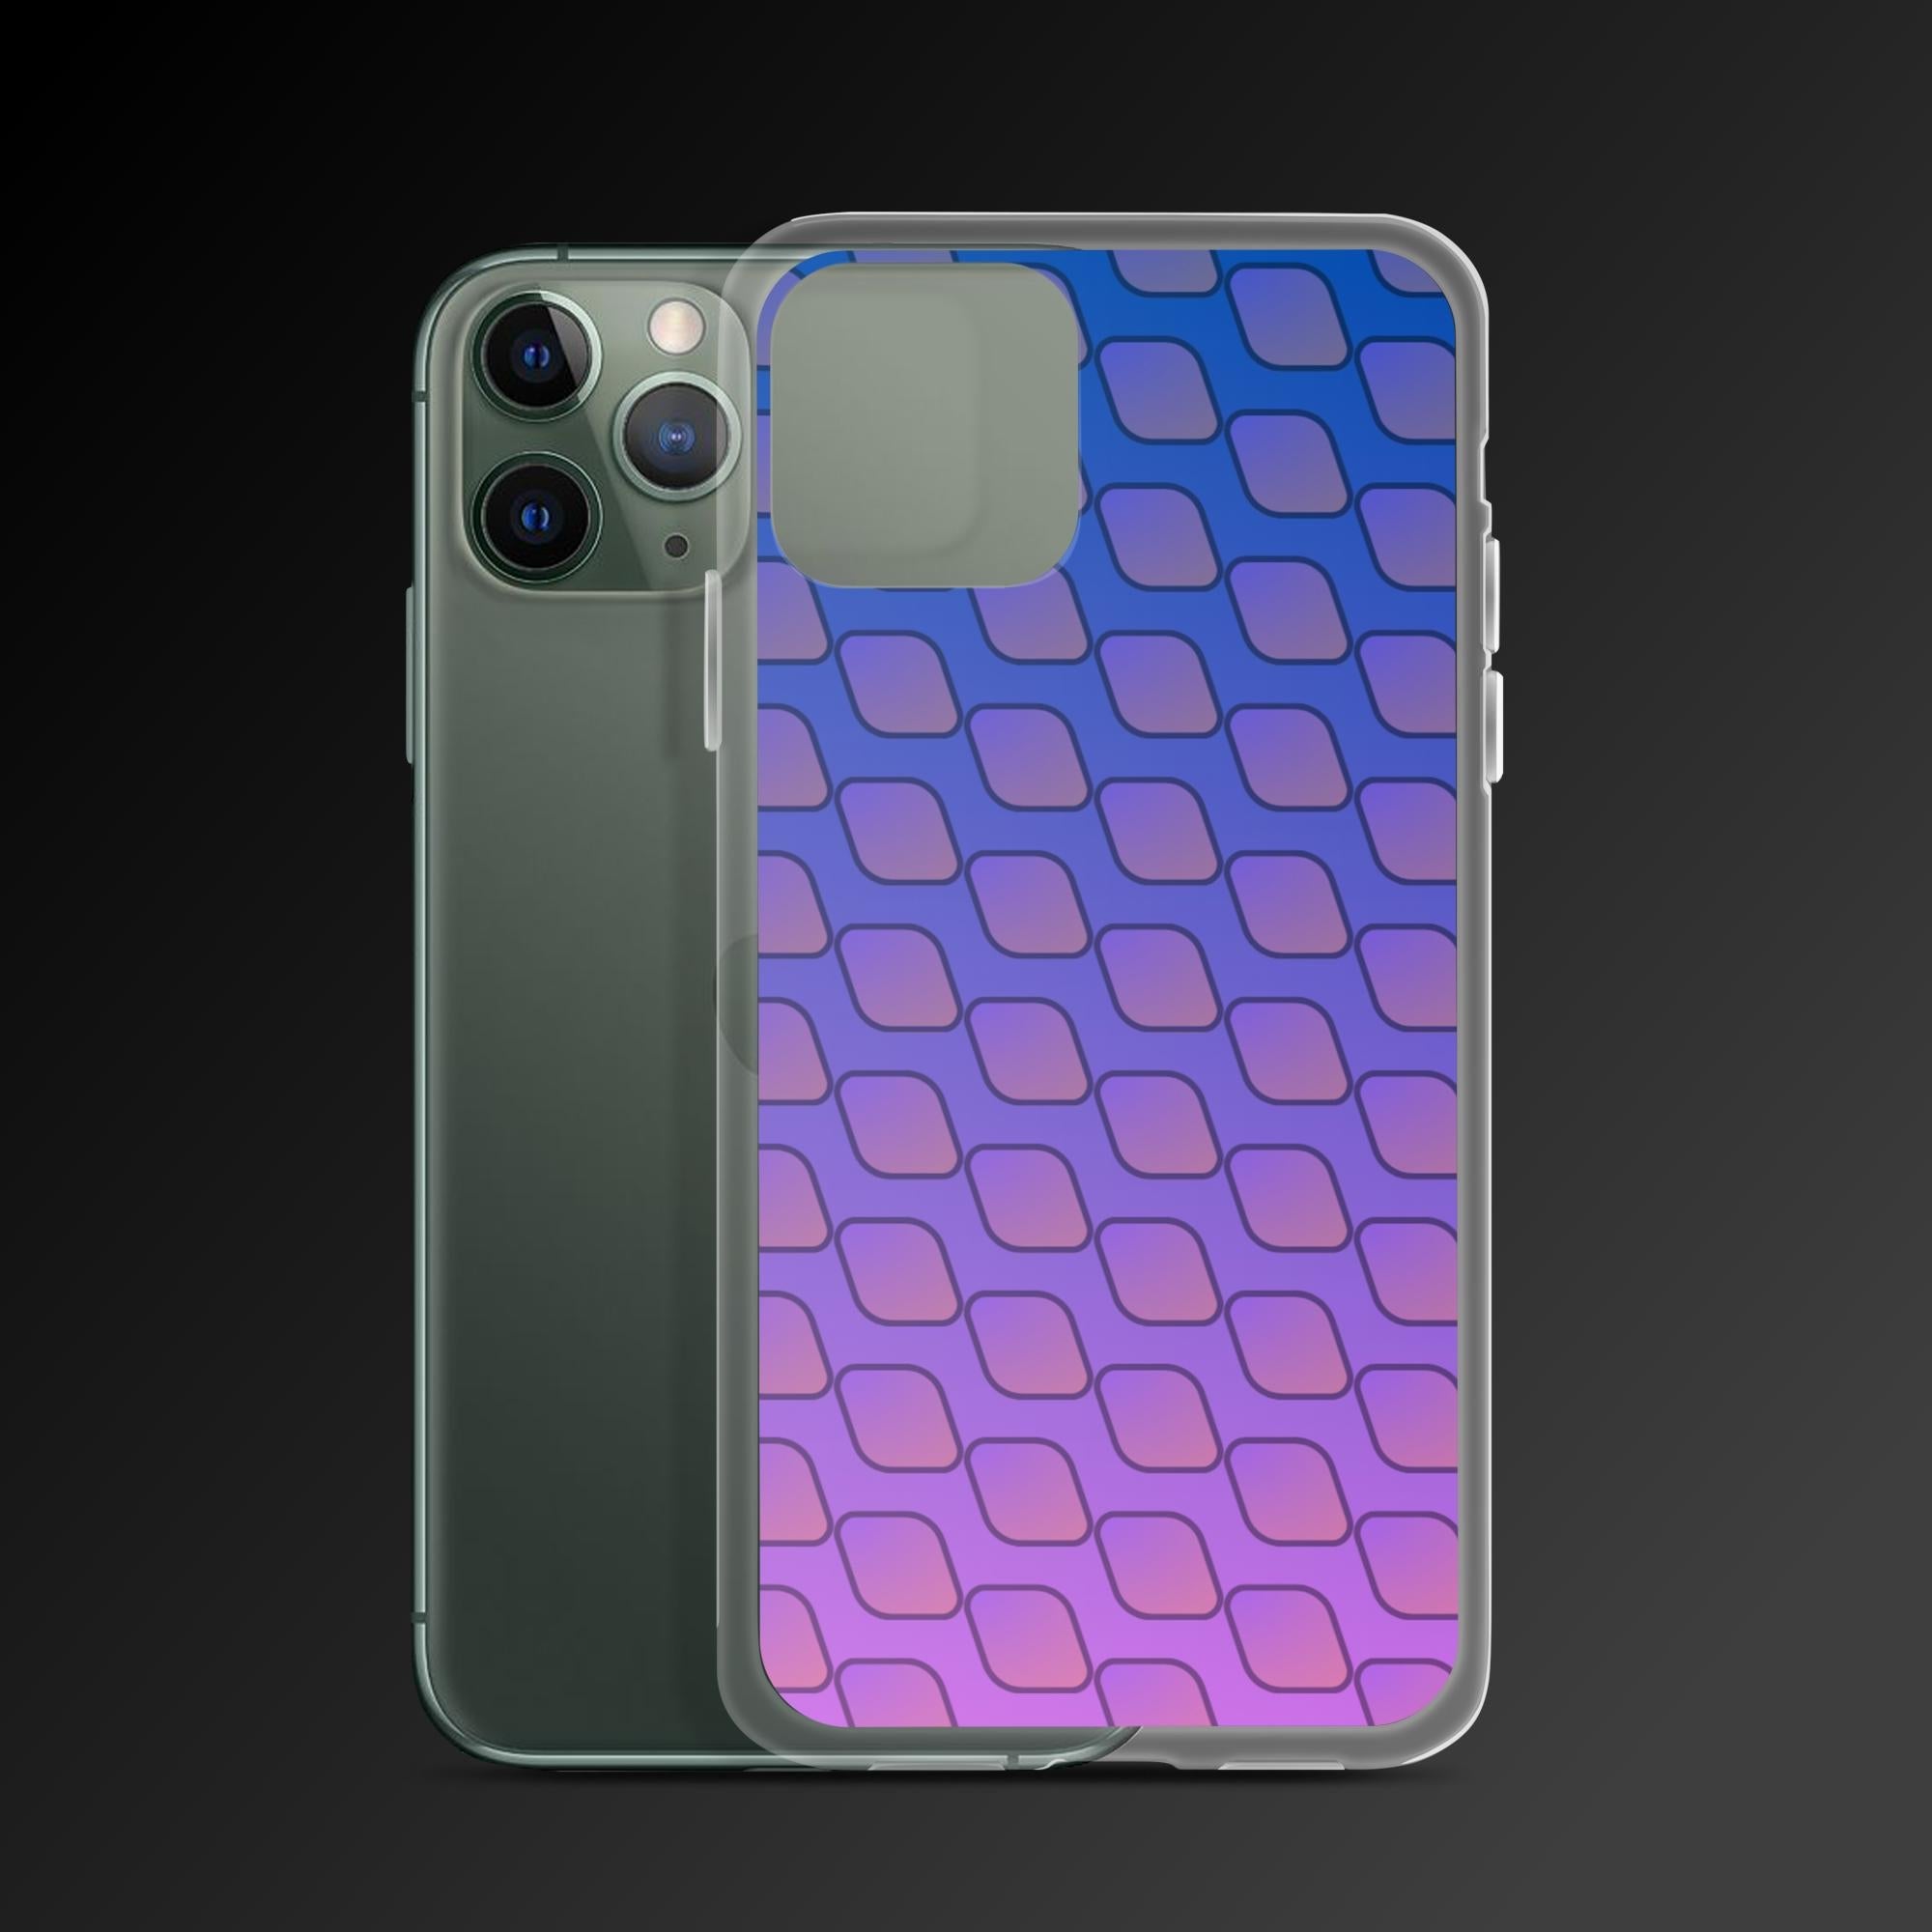 "Diamonds pattern" clear iphone case - Clear iphone case - Ever colorful